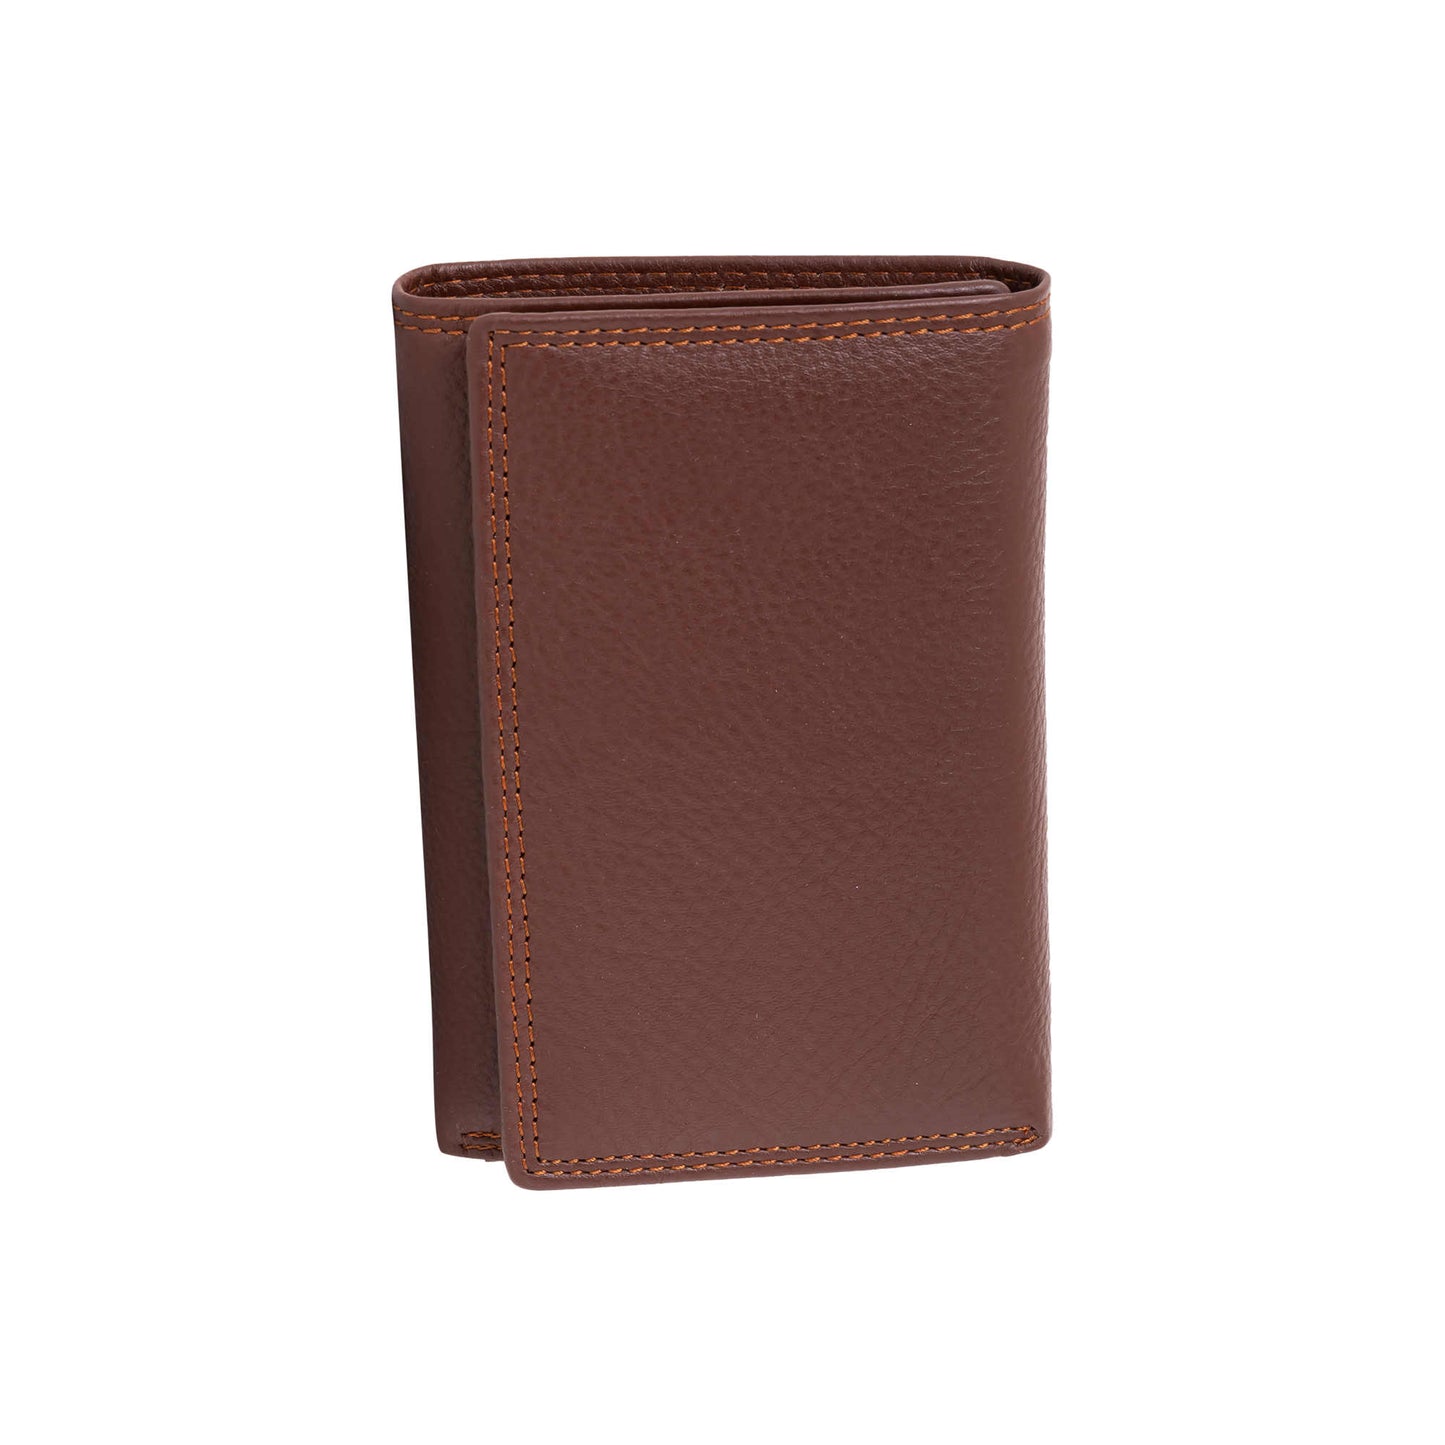 Style n Craft 391109 Ladies Trifold Brown Leather Wallet with Snap Button Closure - Front Top Angled View Closed